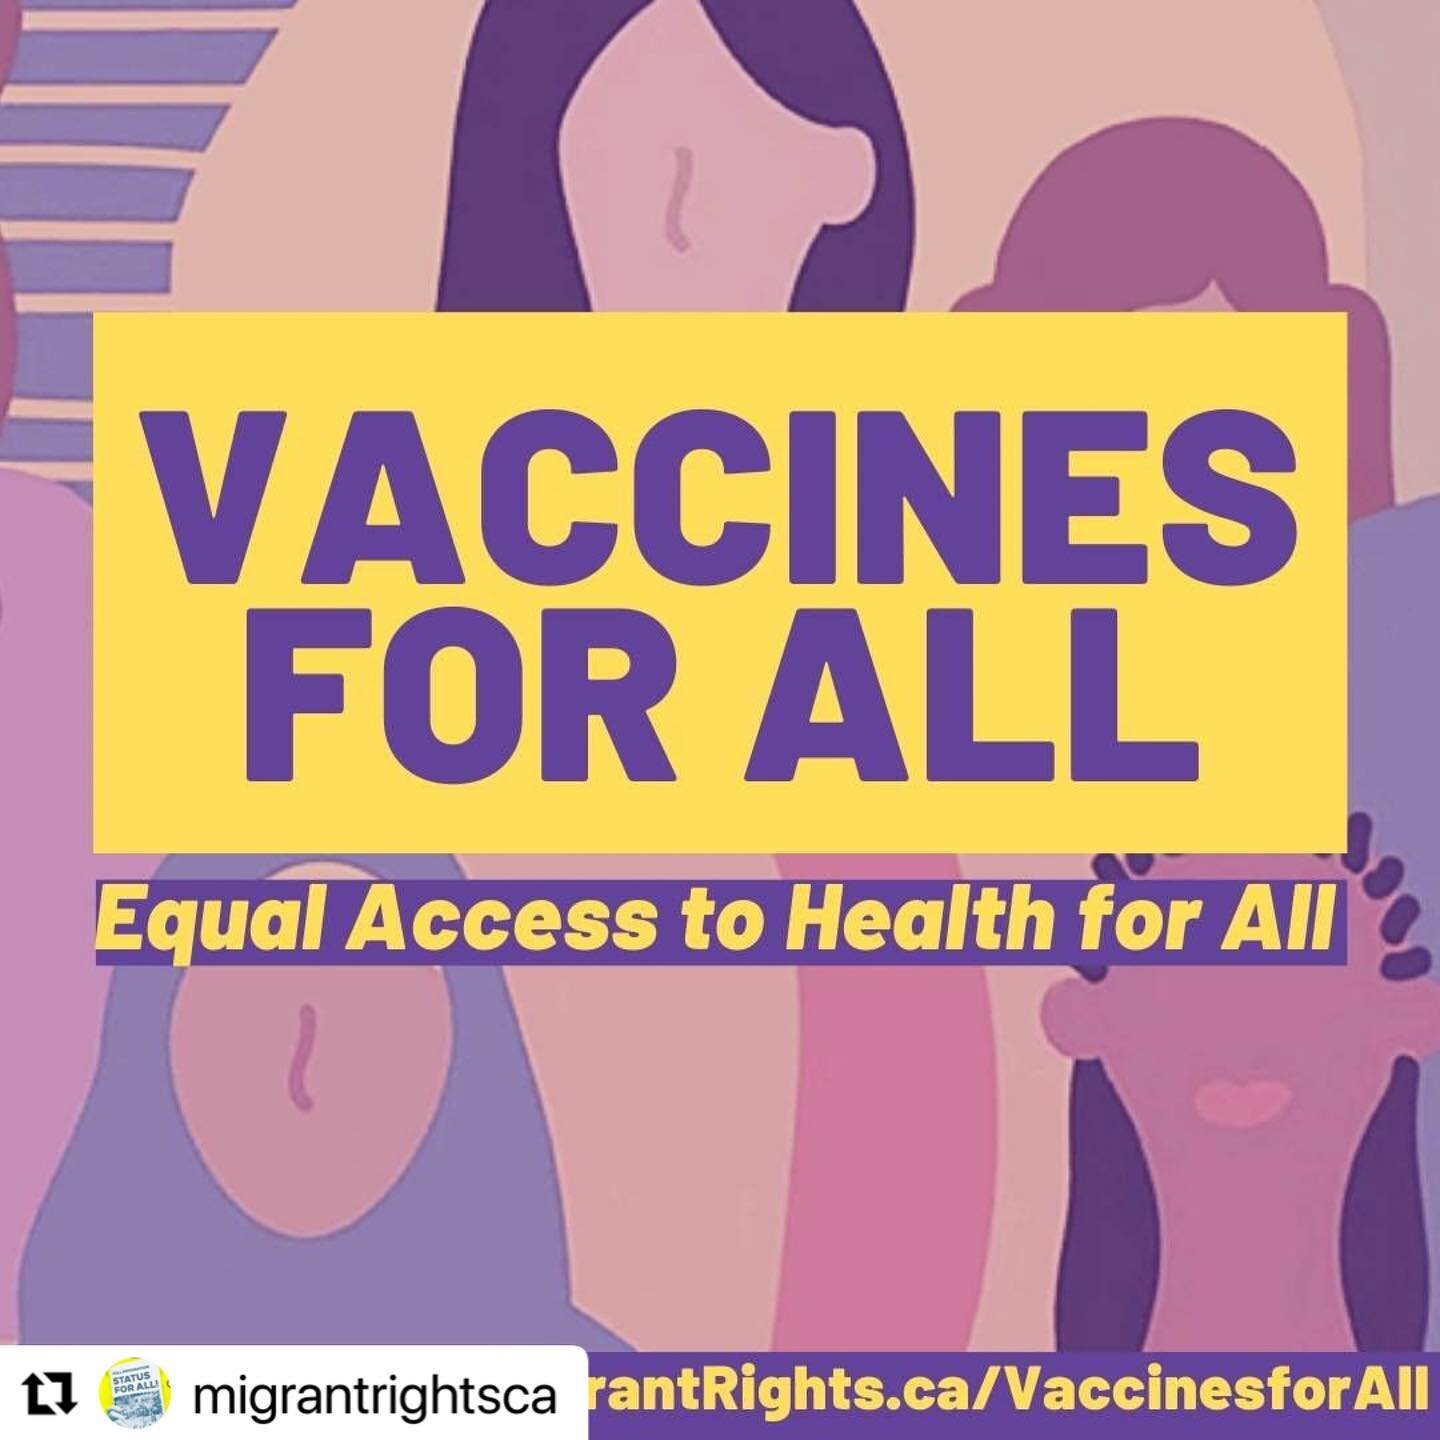 #Repost @migrantrightsca with @make_repost

Join ICA in supporting migrant relatives! Access to the COVID vaccine should be available to all, regardless of immigration status. 

・・・
COVID-19 has affected absolutely everyone, but not all of us are ass